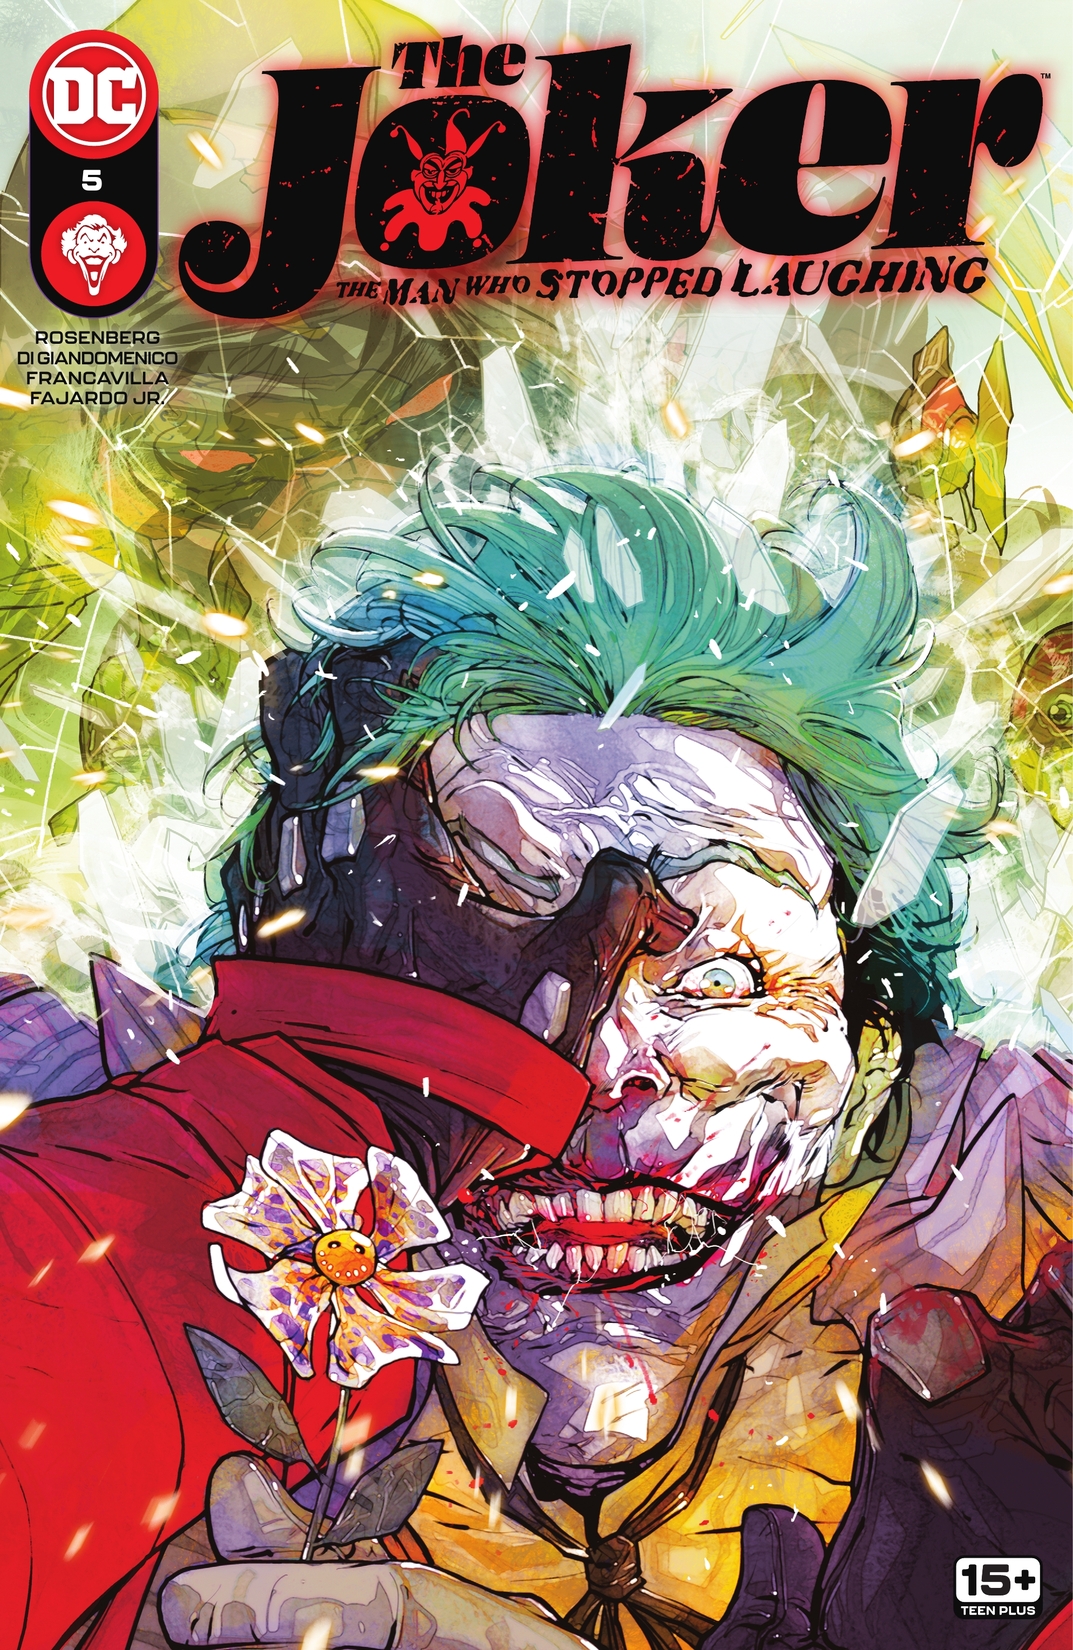 The Joker: The Man Who Stopped Laughing #5 preview images